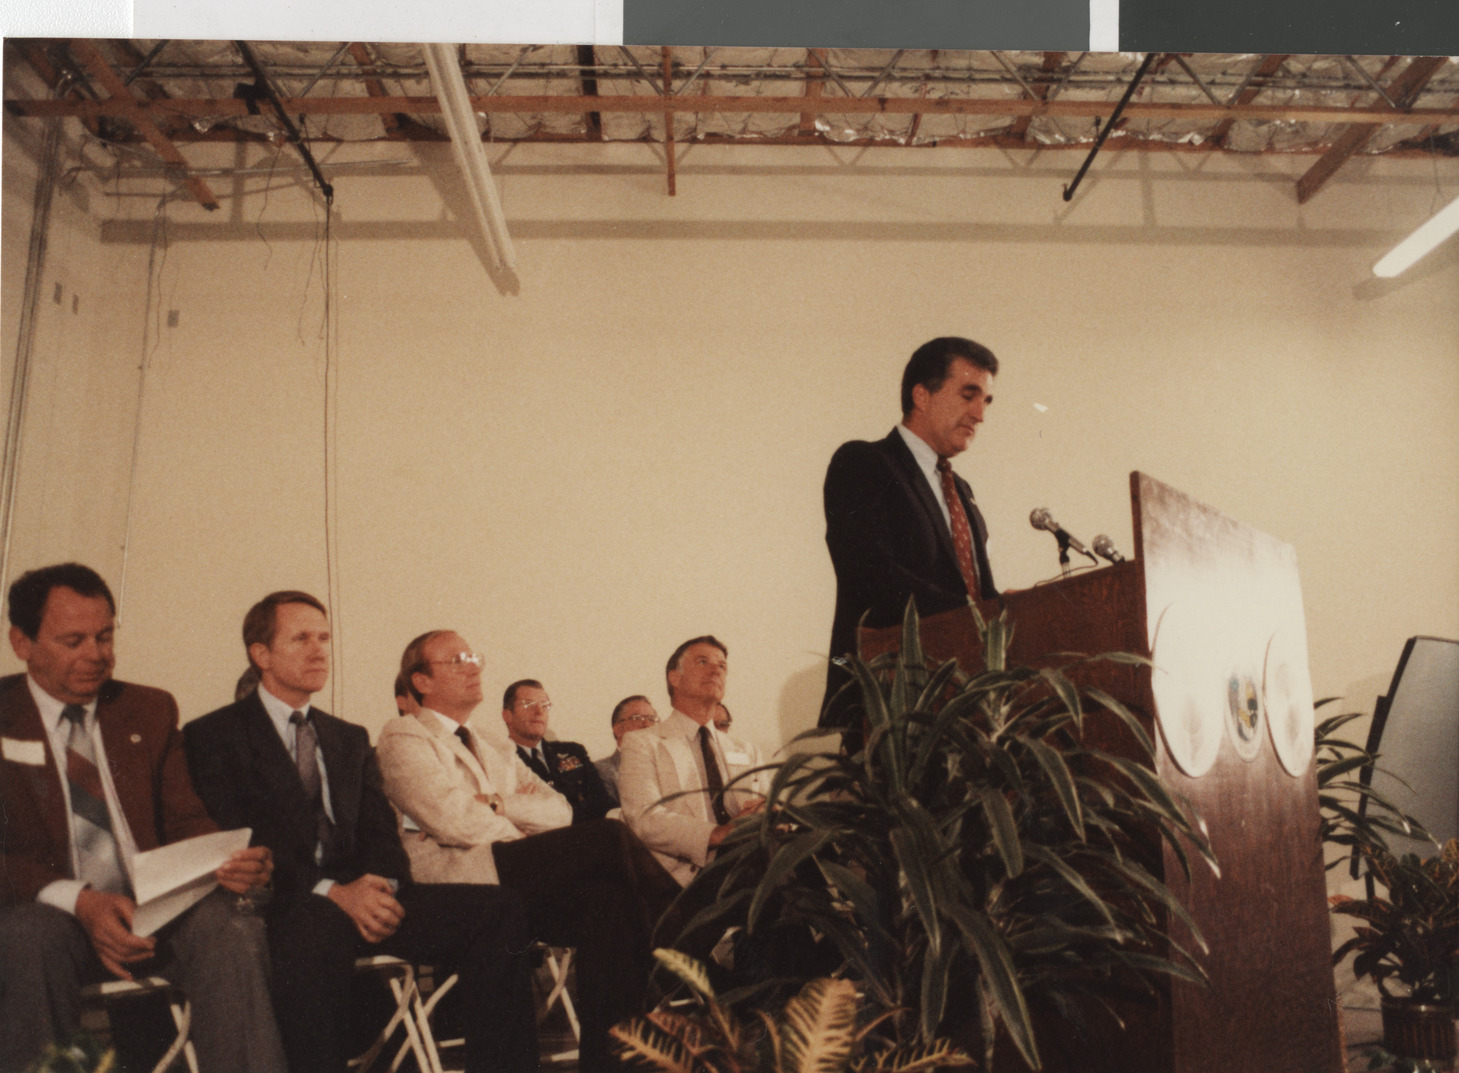 Photograph of Ron Lurie presenting at a podium, circa 1978